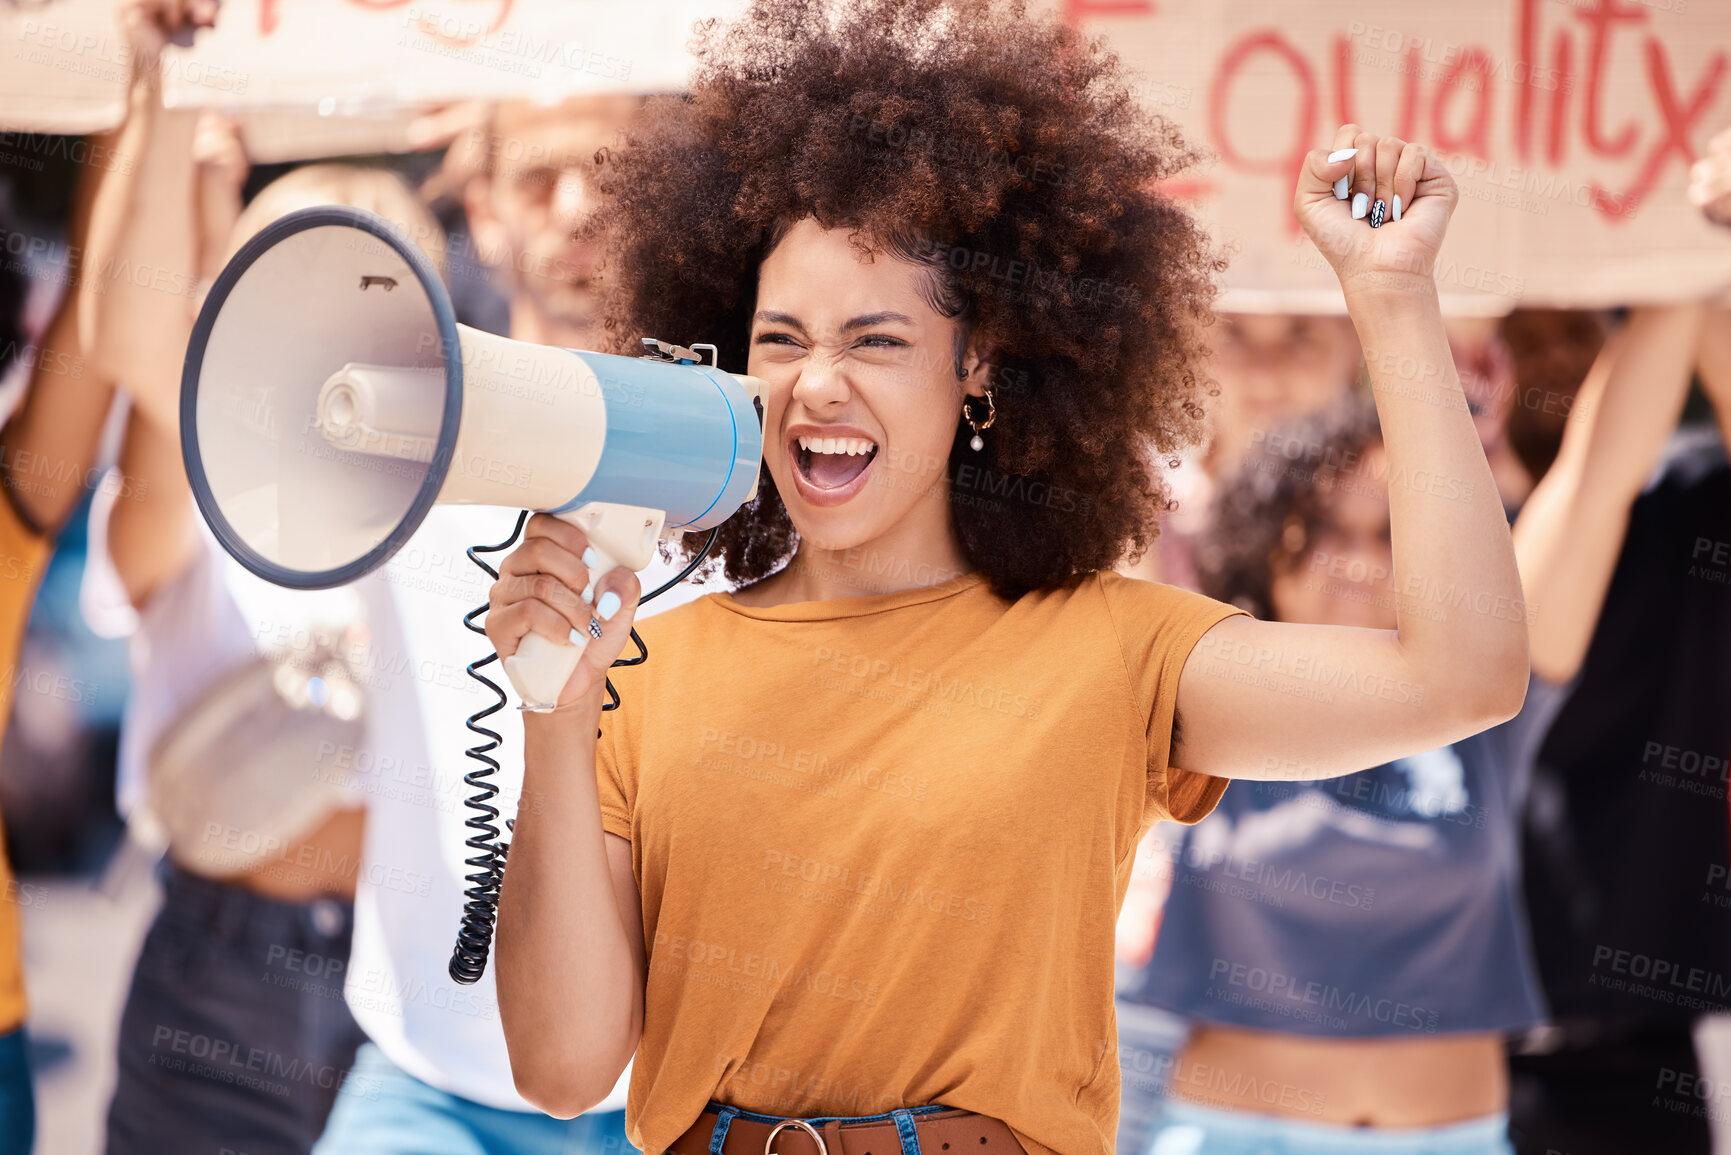 Buy stock photo Megaphone, equality or women rights protest for global change, gender equality or angry black woman fight for support. Crowd poster banner, city speech or human rights rally by social justice warrior